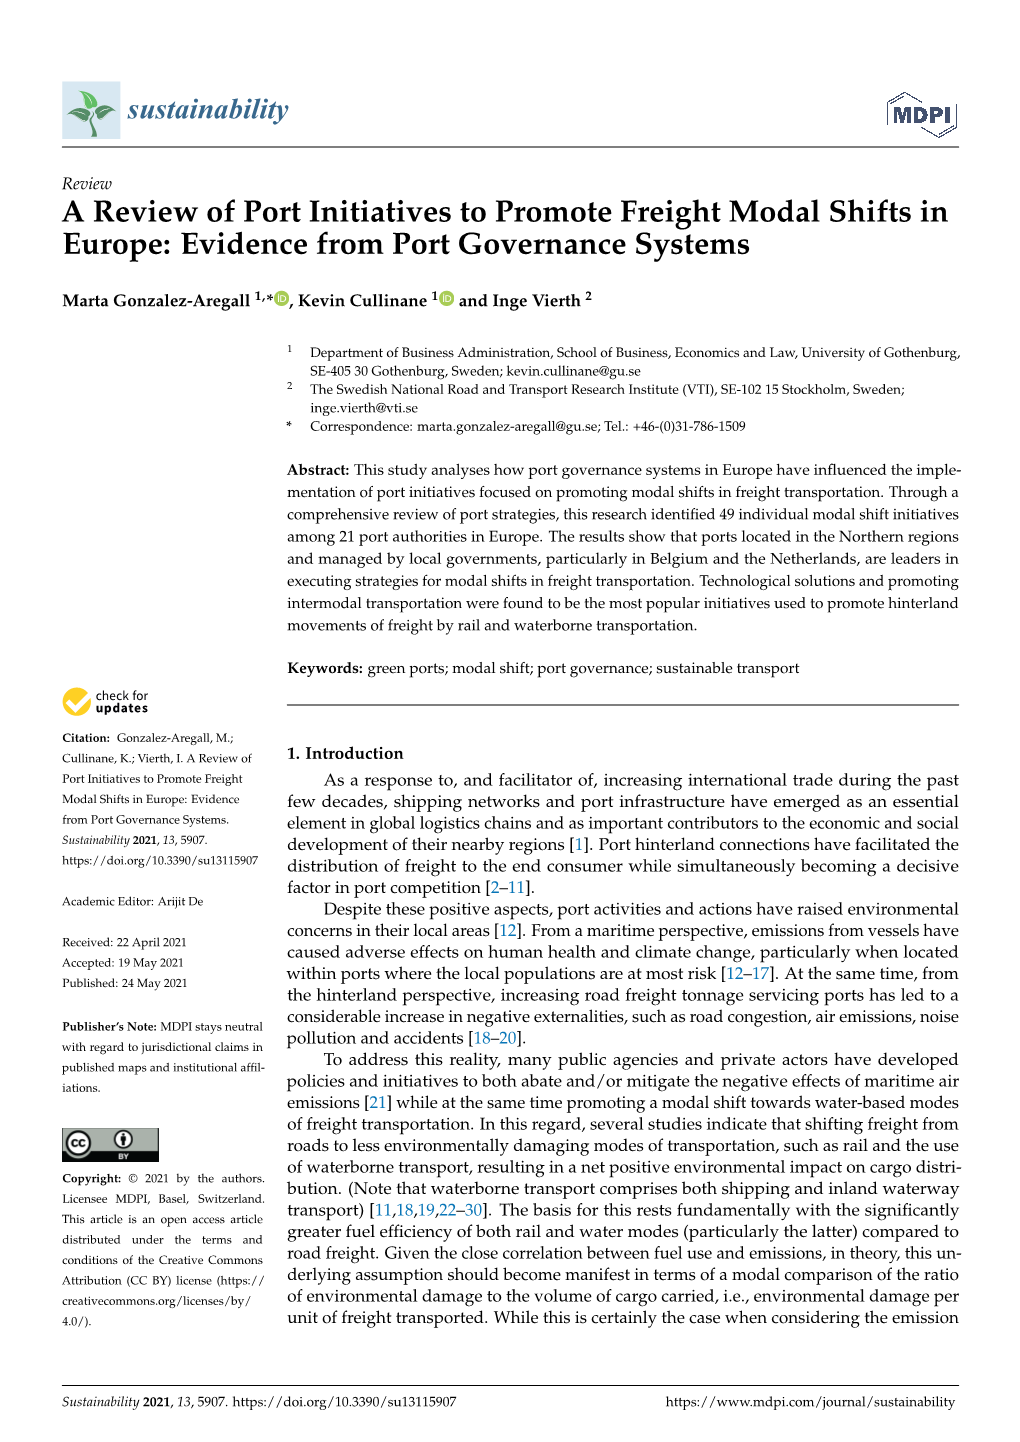 A Review of Port Initiatives to Promote Freight Modal Shifts in Europe: Evidence from Port Governance Systems